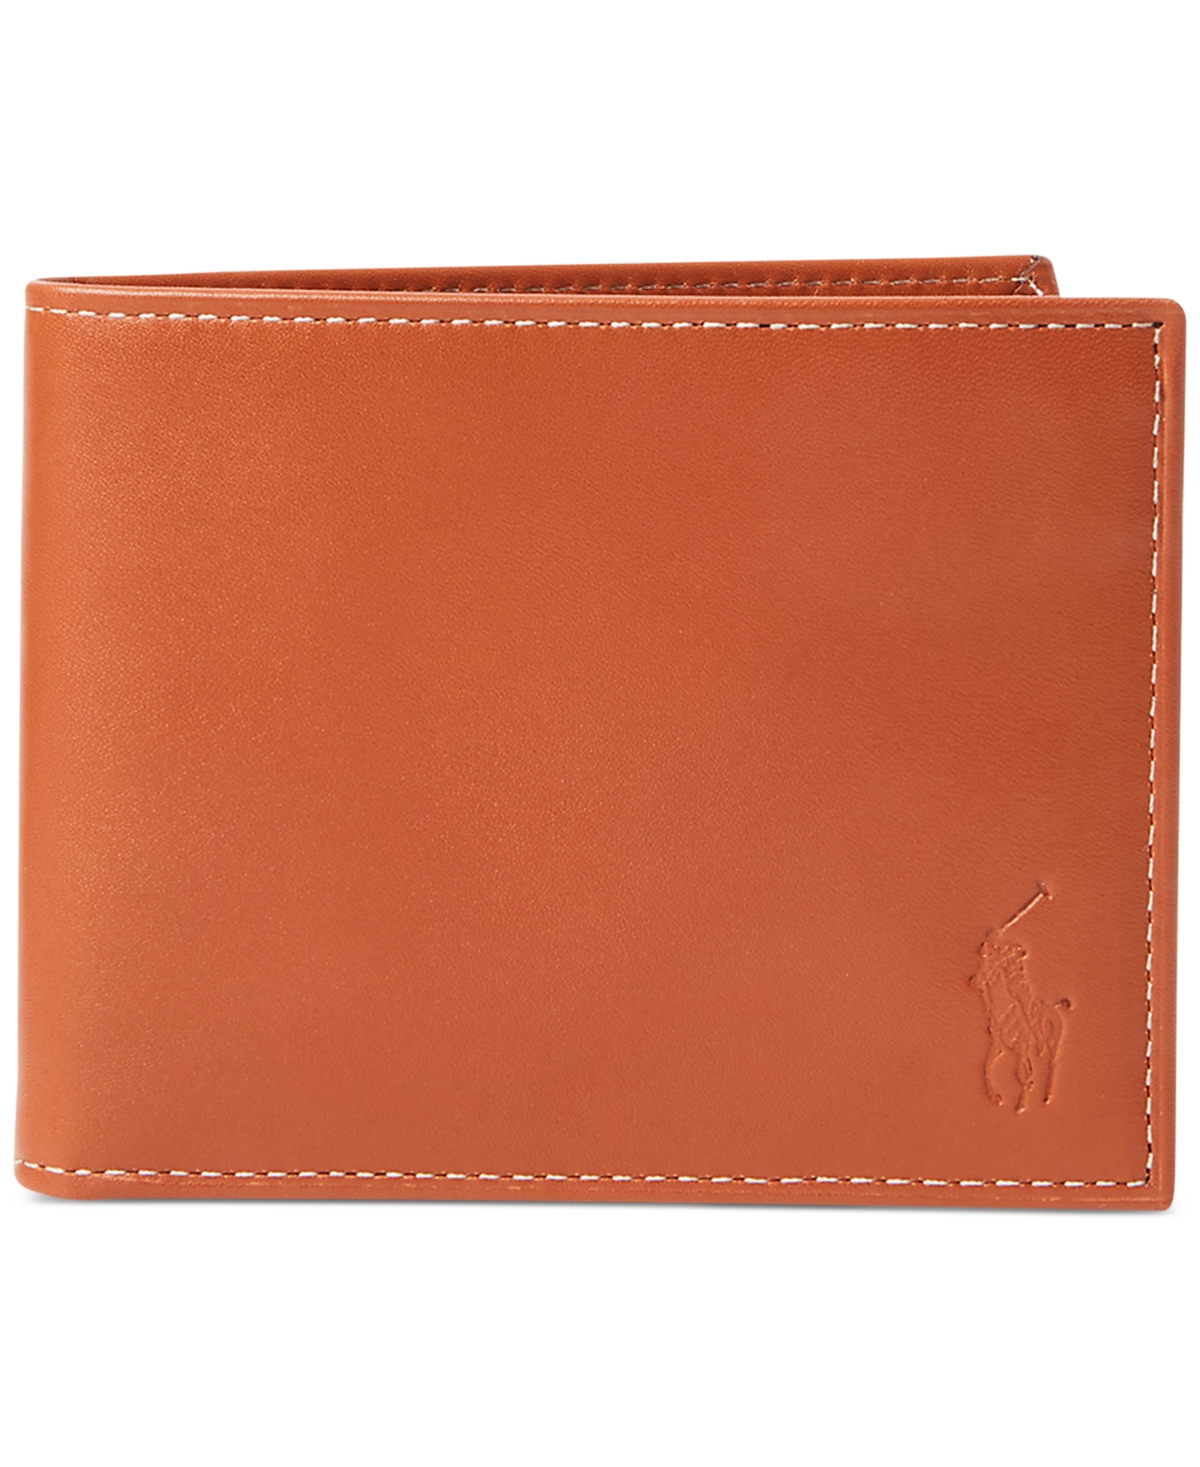 Men's Burnished Leather Passcase - Brown